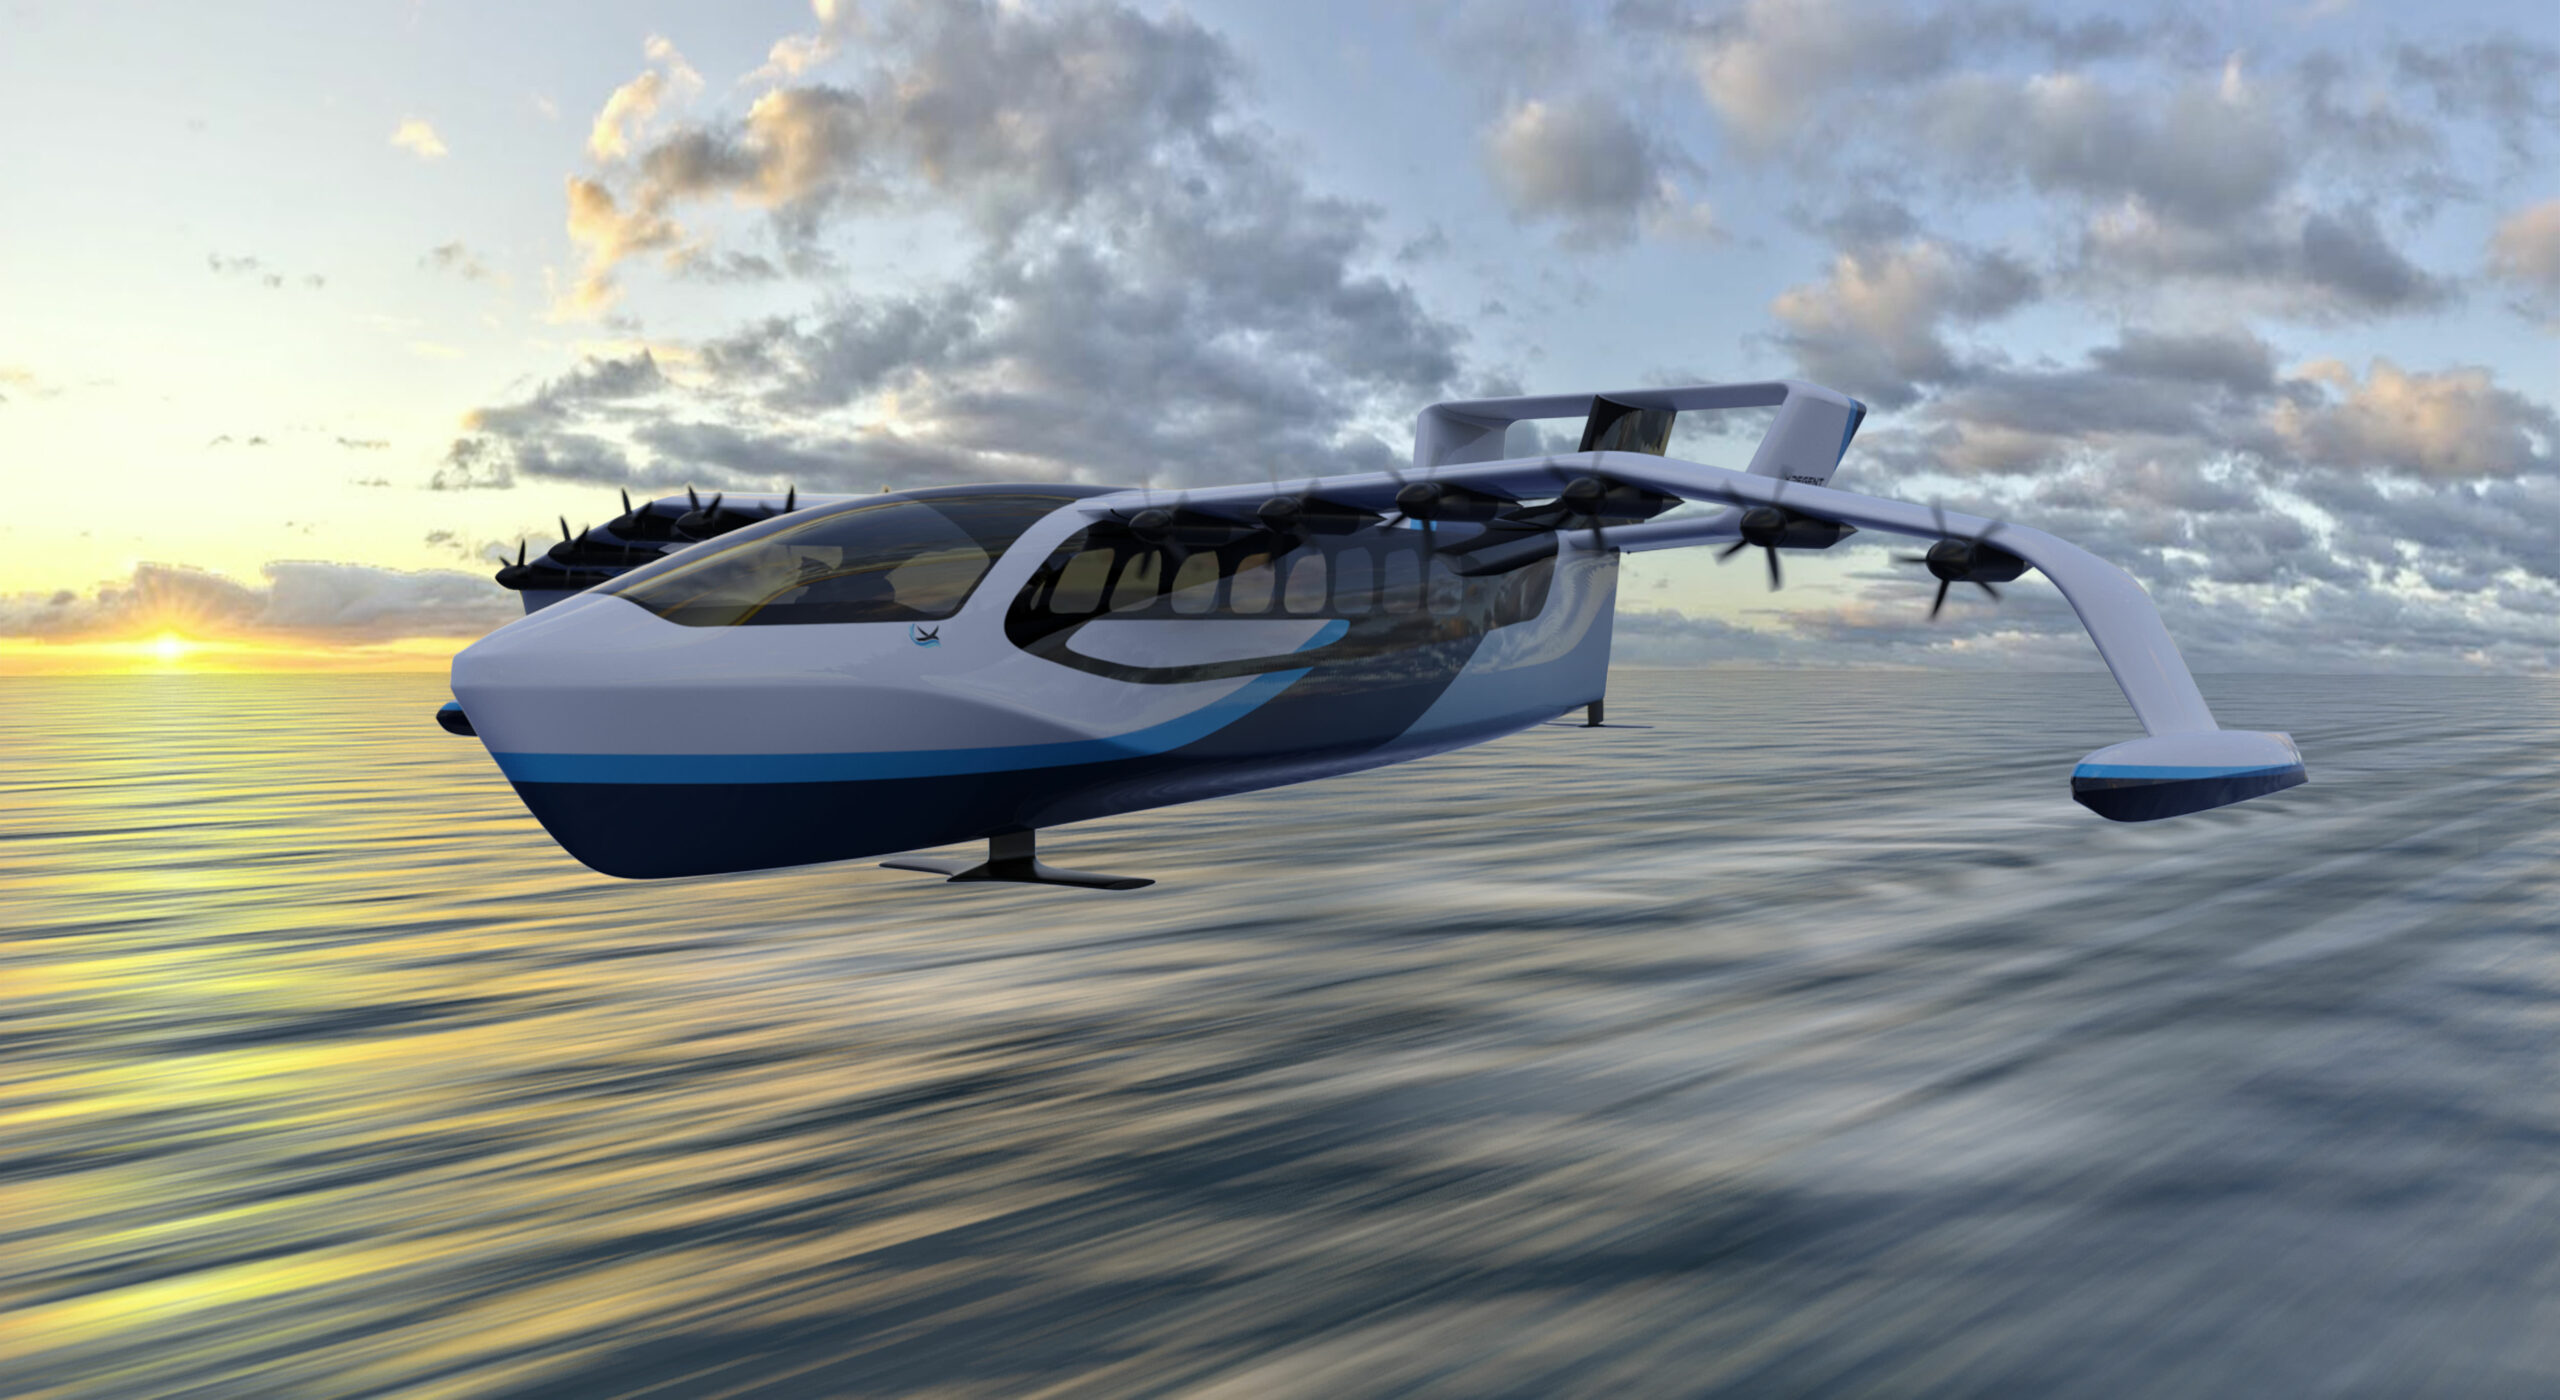 All-Electric passenger vessel Seaglider to fly after LR certification